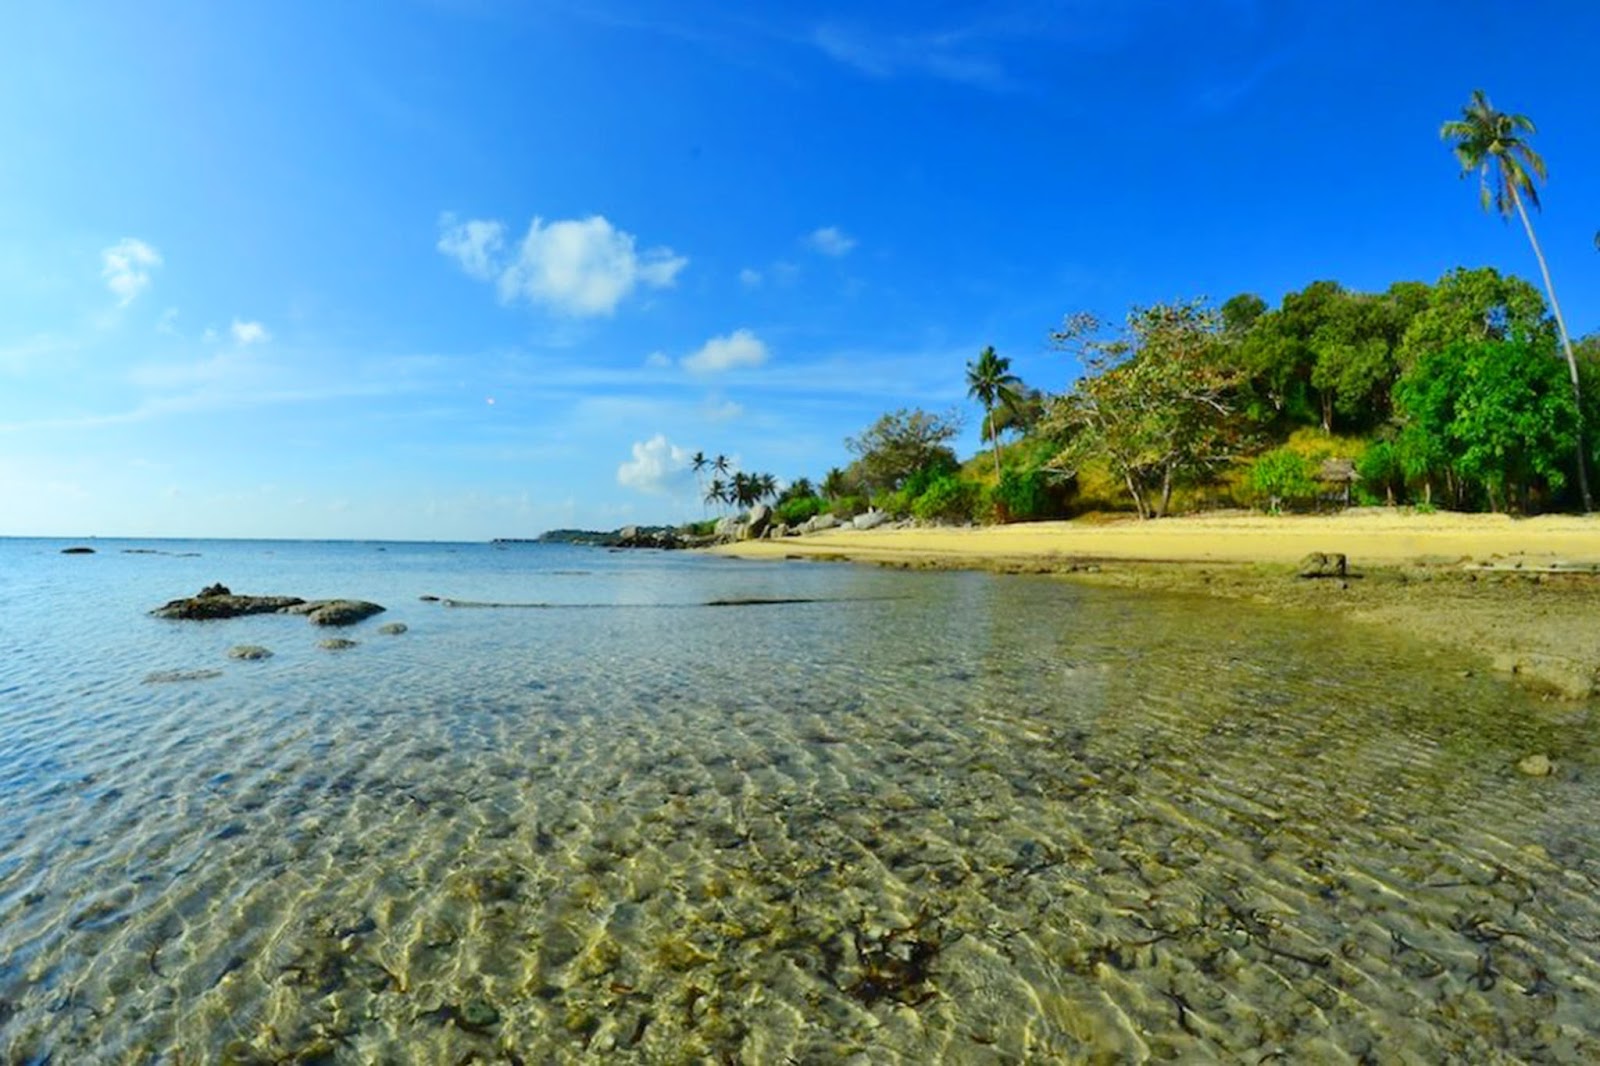 Trikora Beach is located in Riau Islands province. Precisely located in Malang Rapat Village, Gunung Kijang District, Bintan Regency, Riau Islands Province, Sumatera. This beach is 45 km to the east of the provincial capital of Riau Islands, Tanjungpinang.